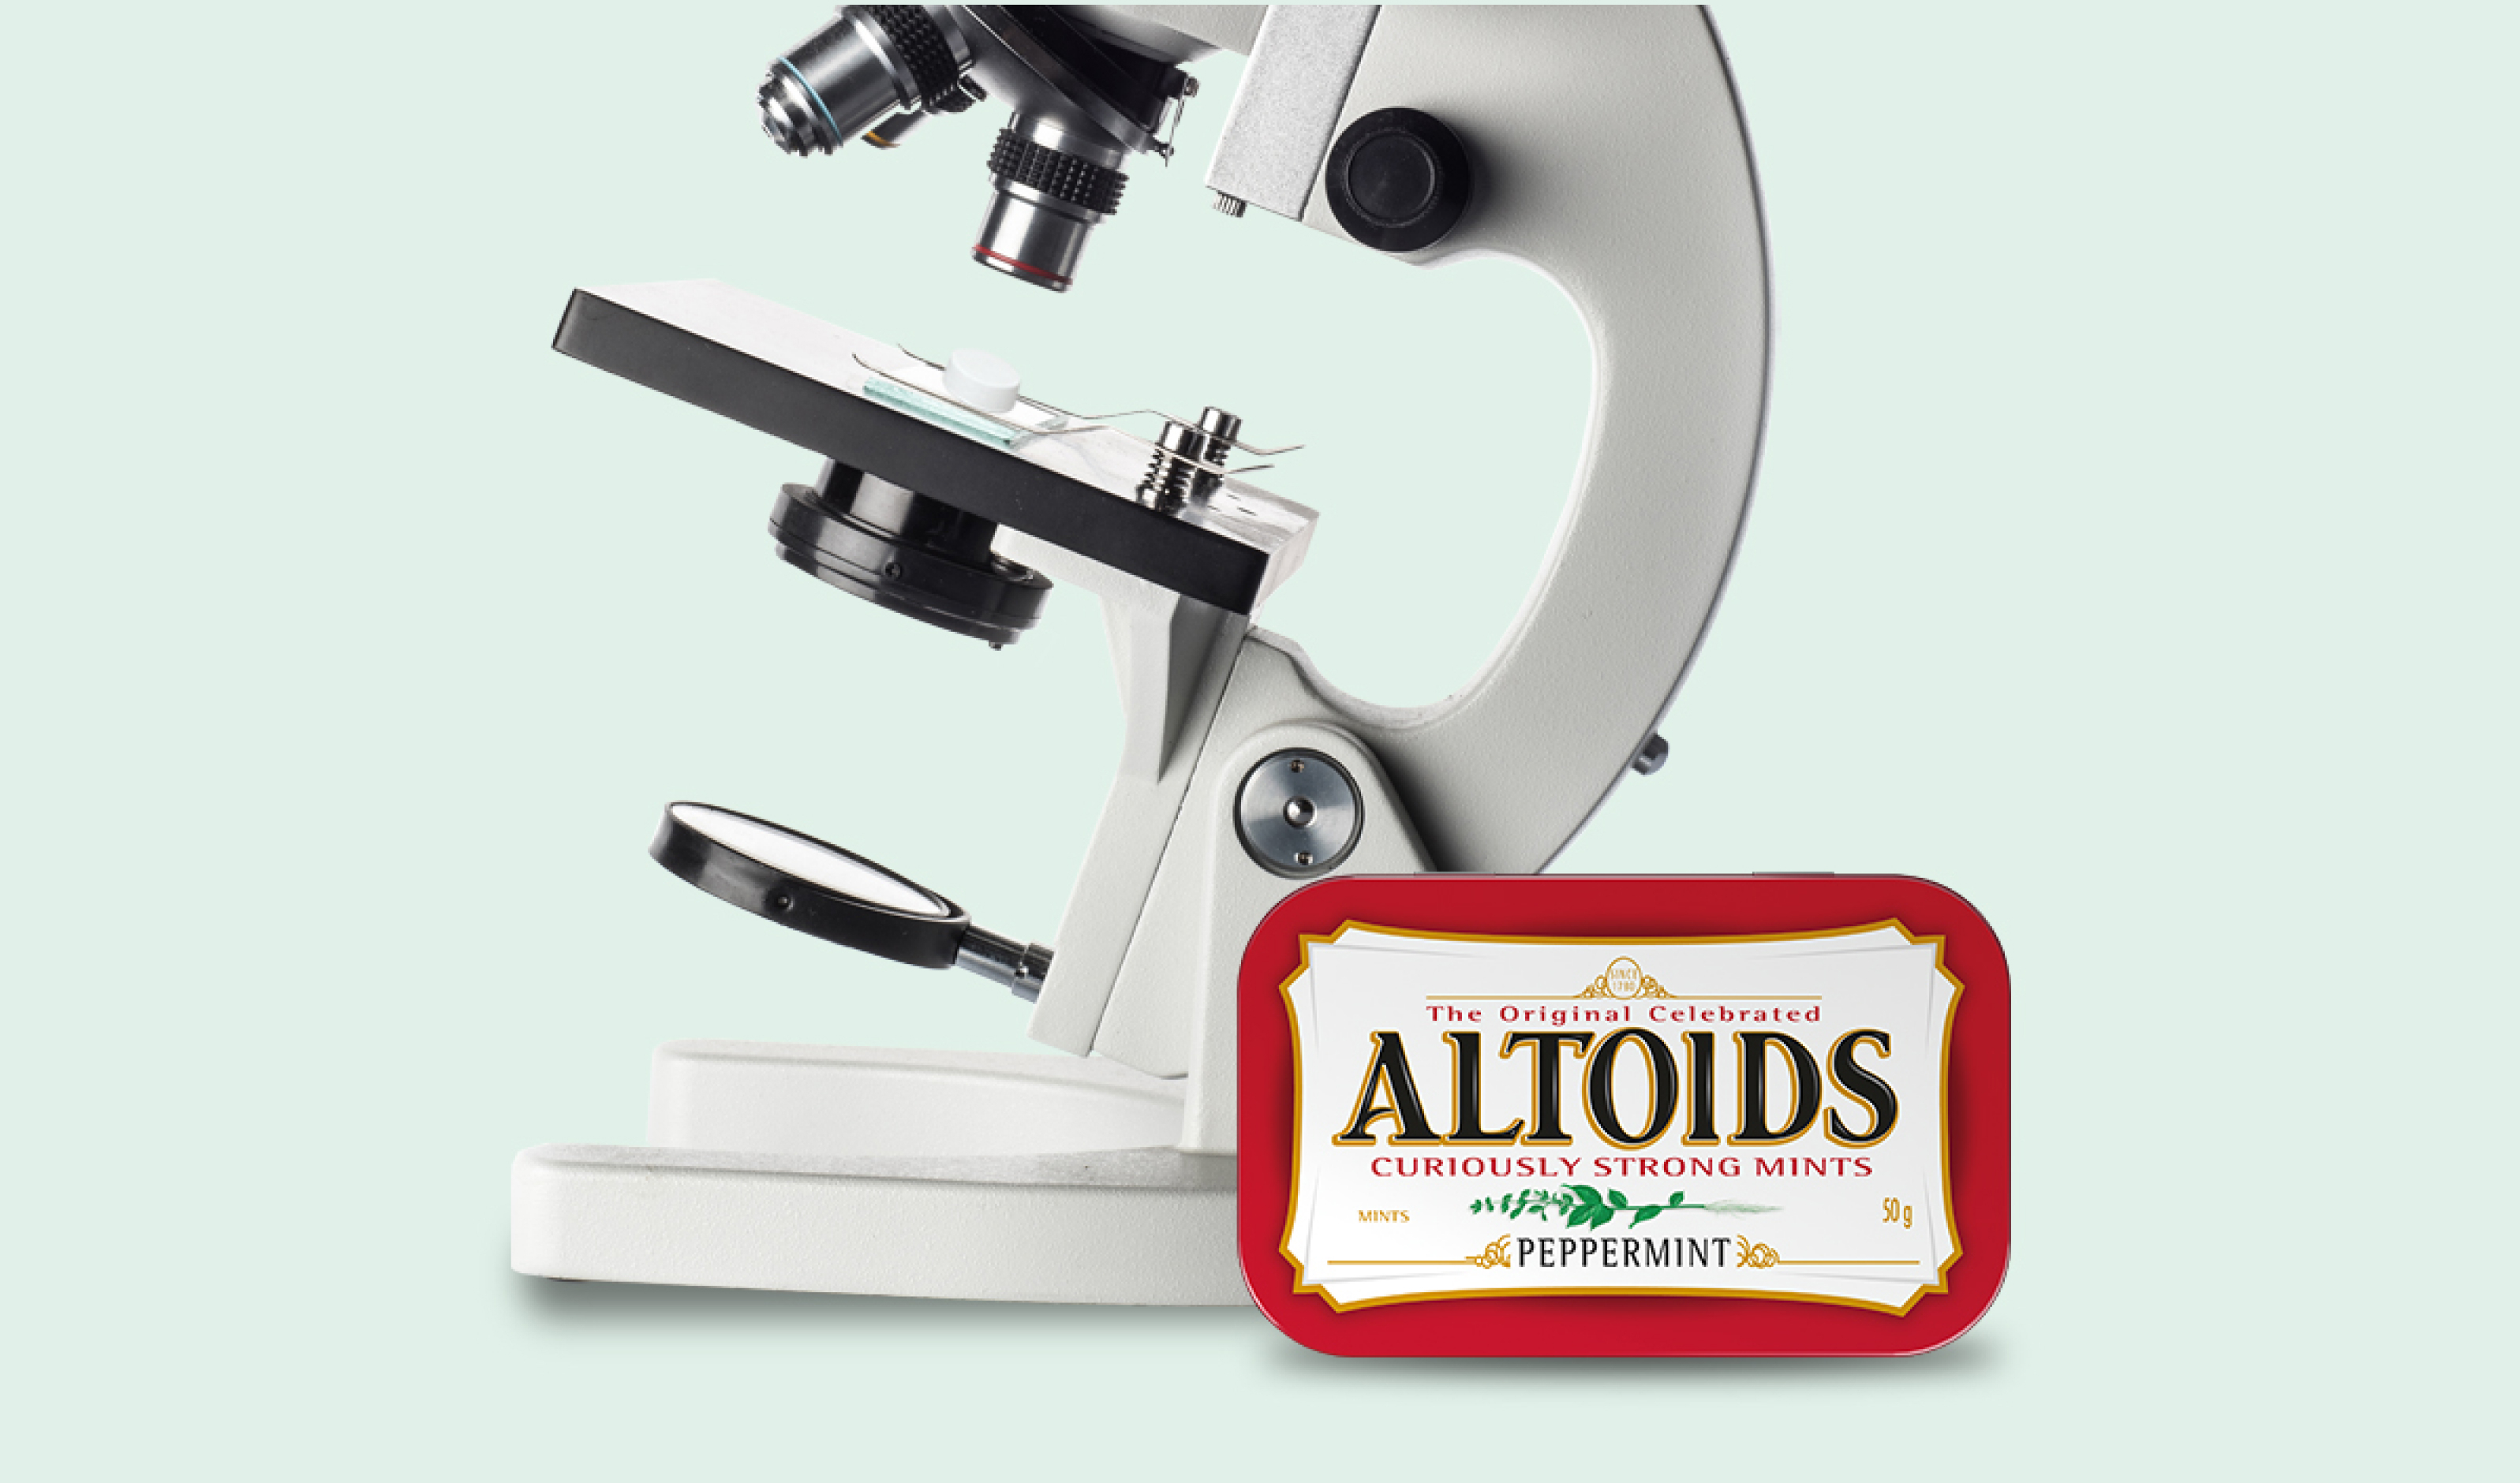 Tin of Peppermint Altoids in front of a microscope on a mint green background